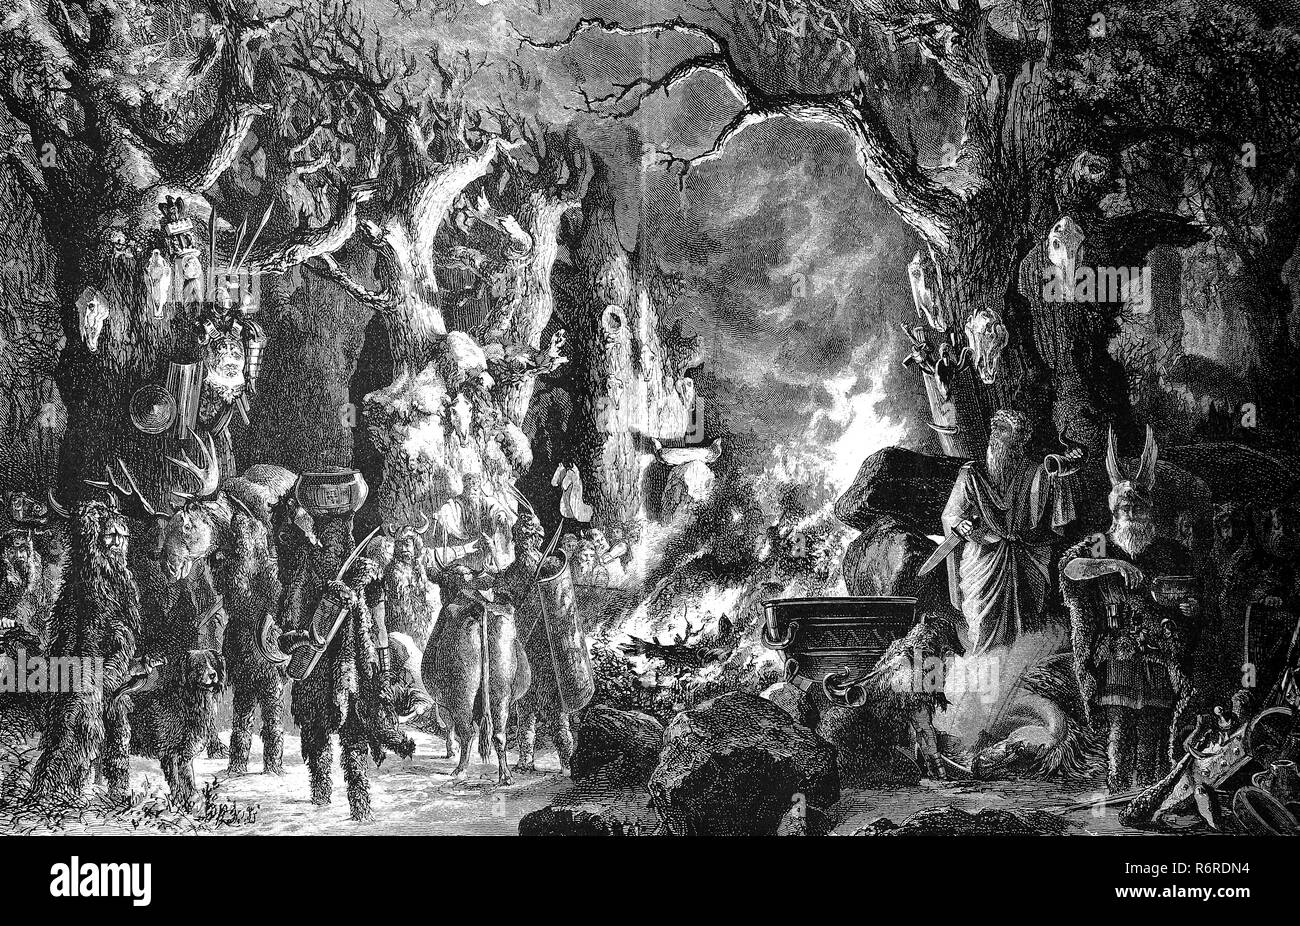 Digital improved reproduction, Yule or Yuletide, Yule time, a festival observed by the historical Germanic peoples, Altnordischer Julfest, original print from the 19th century Stock Photo